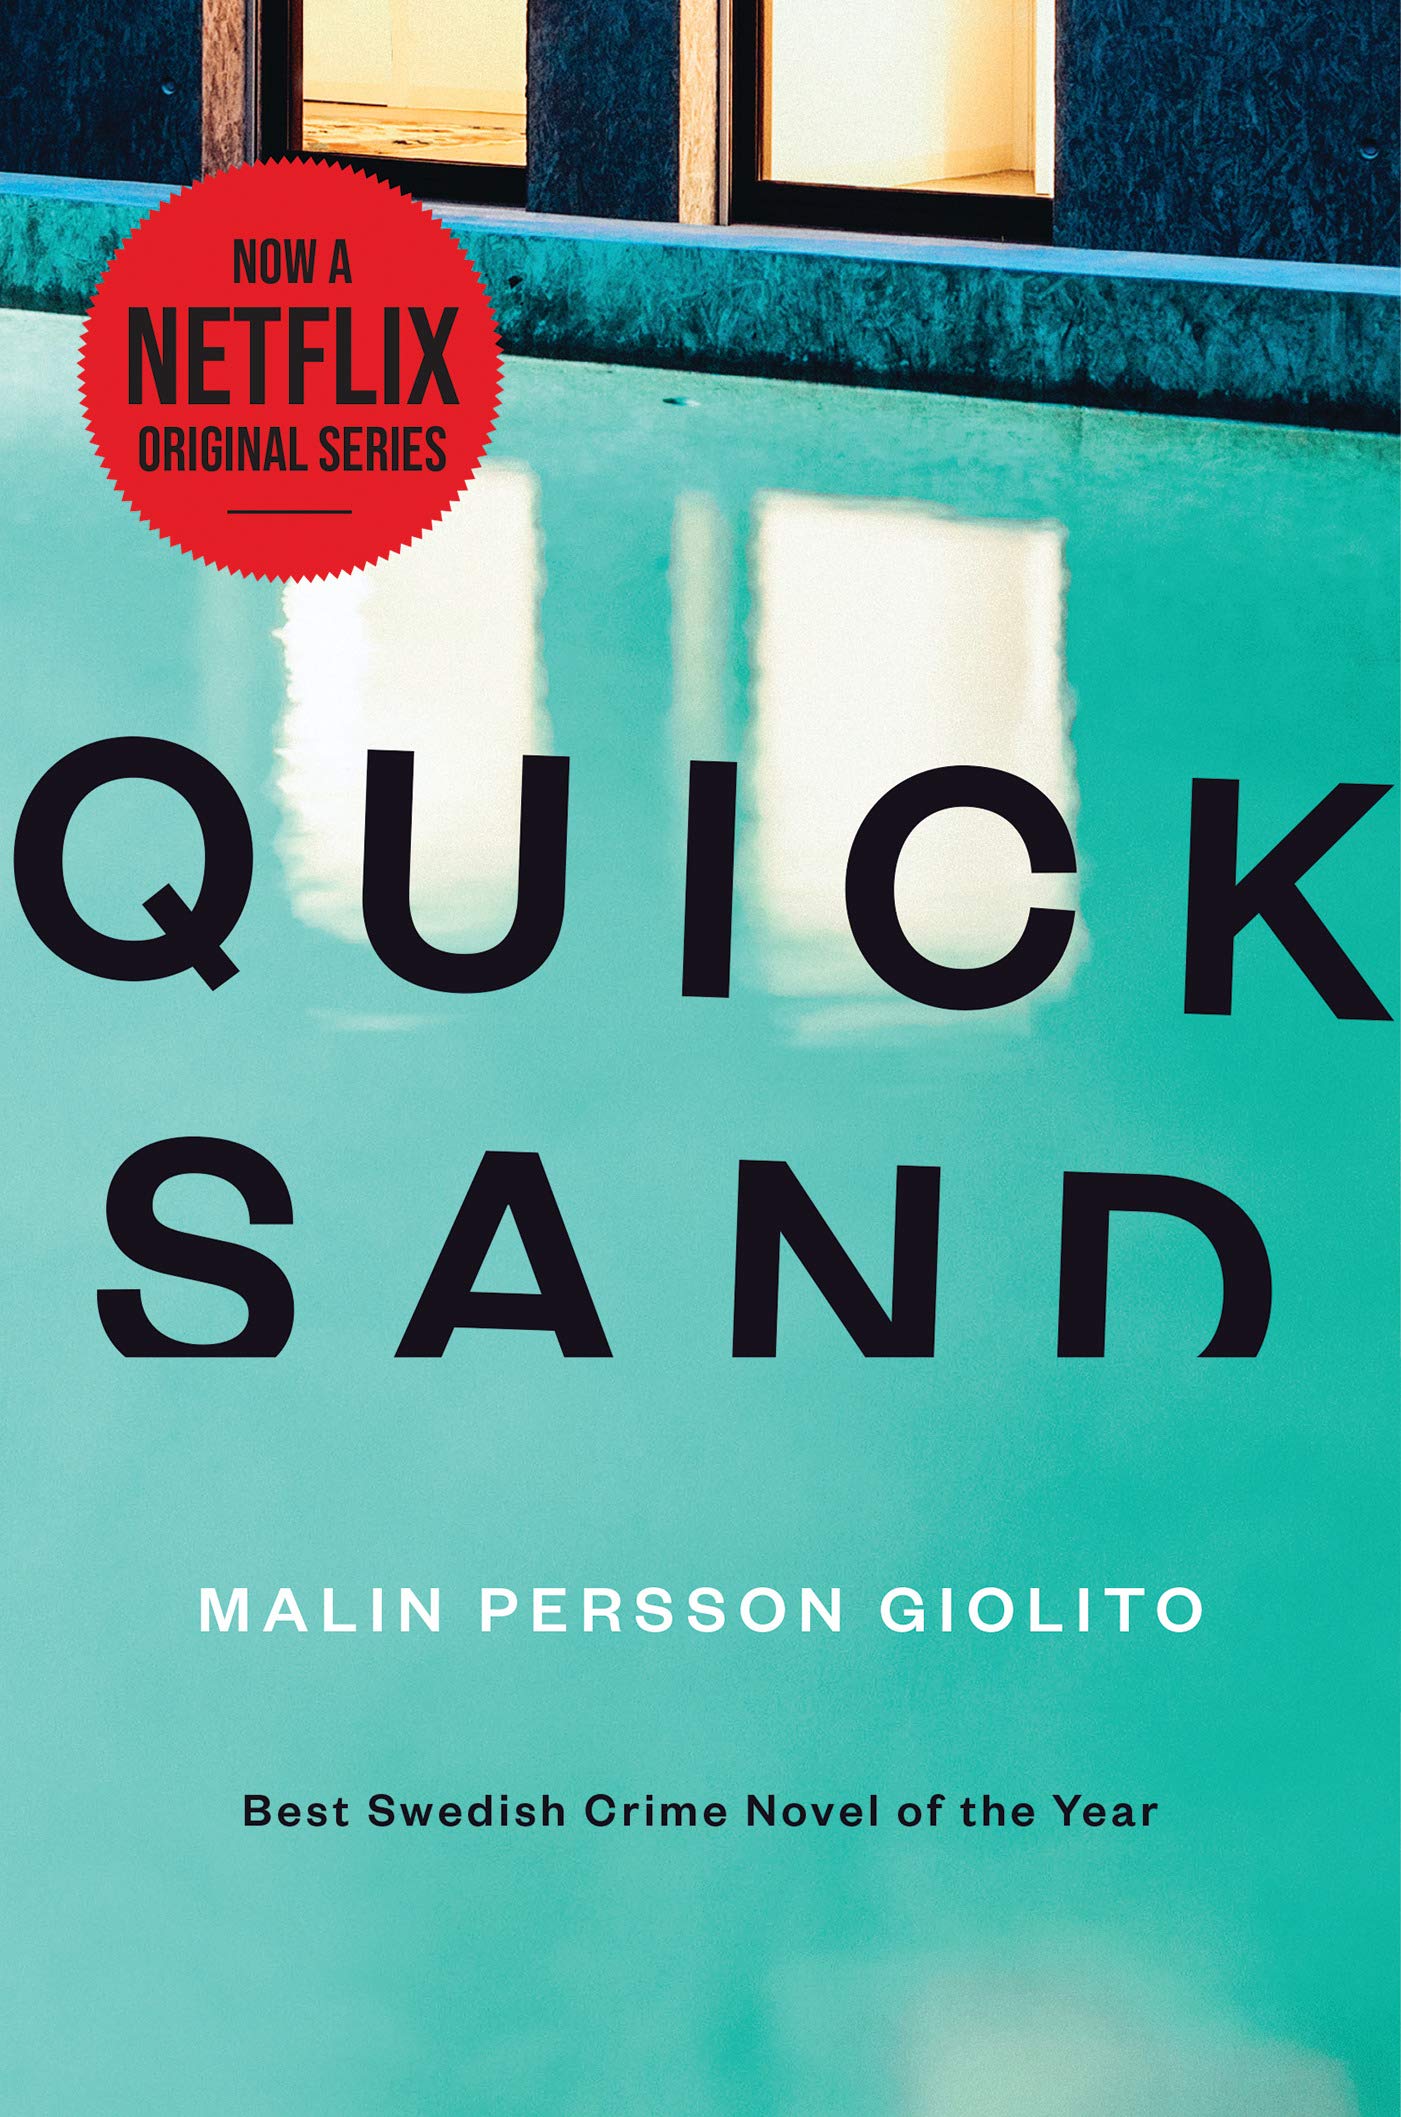 Promotional book cover for "quicksand" by malin persson giolito, highlighting its recognition as best swedish crime novel of the year and its adaptation into a netflix series.